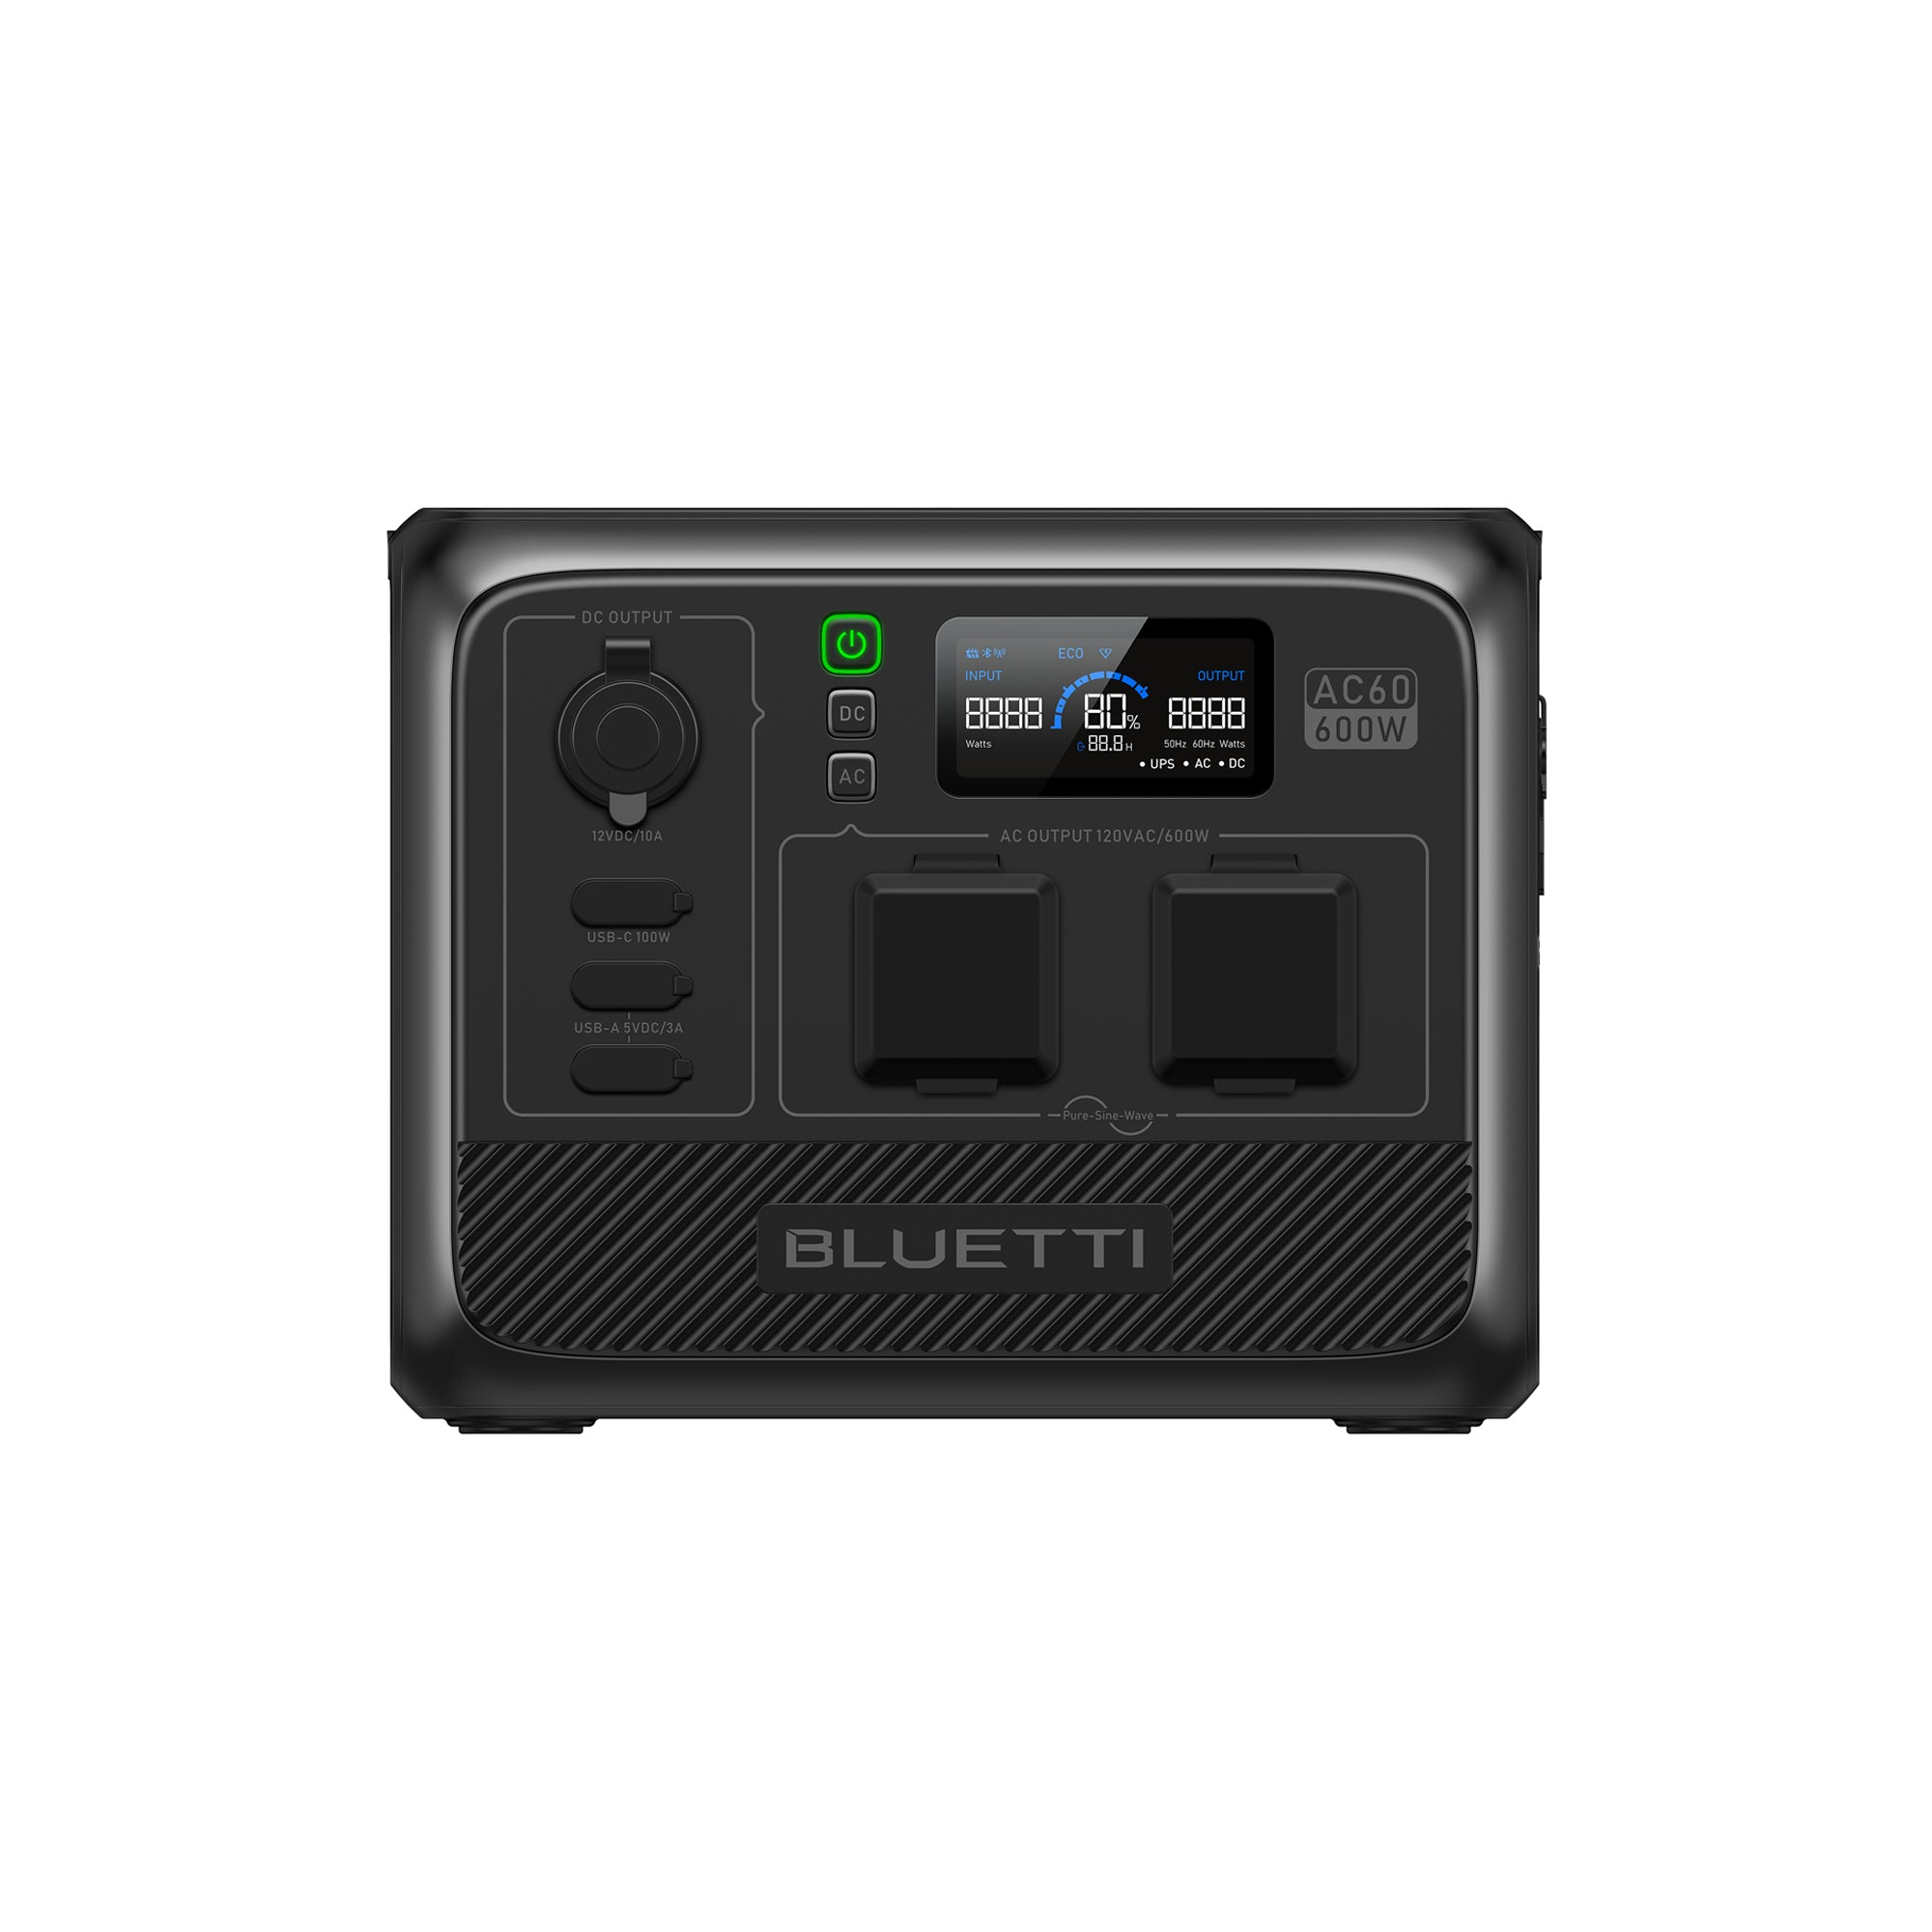 BLUETTI AC60 Portable Power Station / 600W 403Wh, AC60 / 600W, 403Wh Power Station